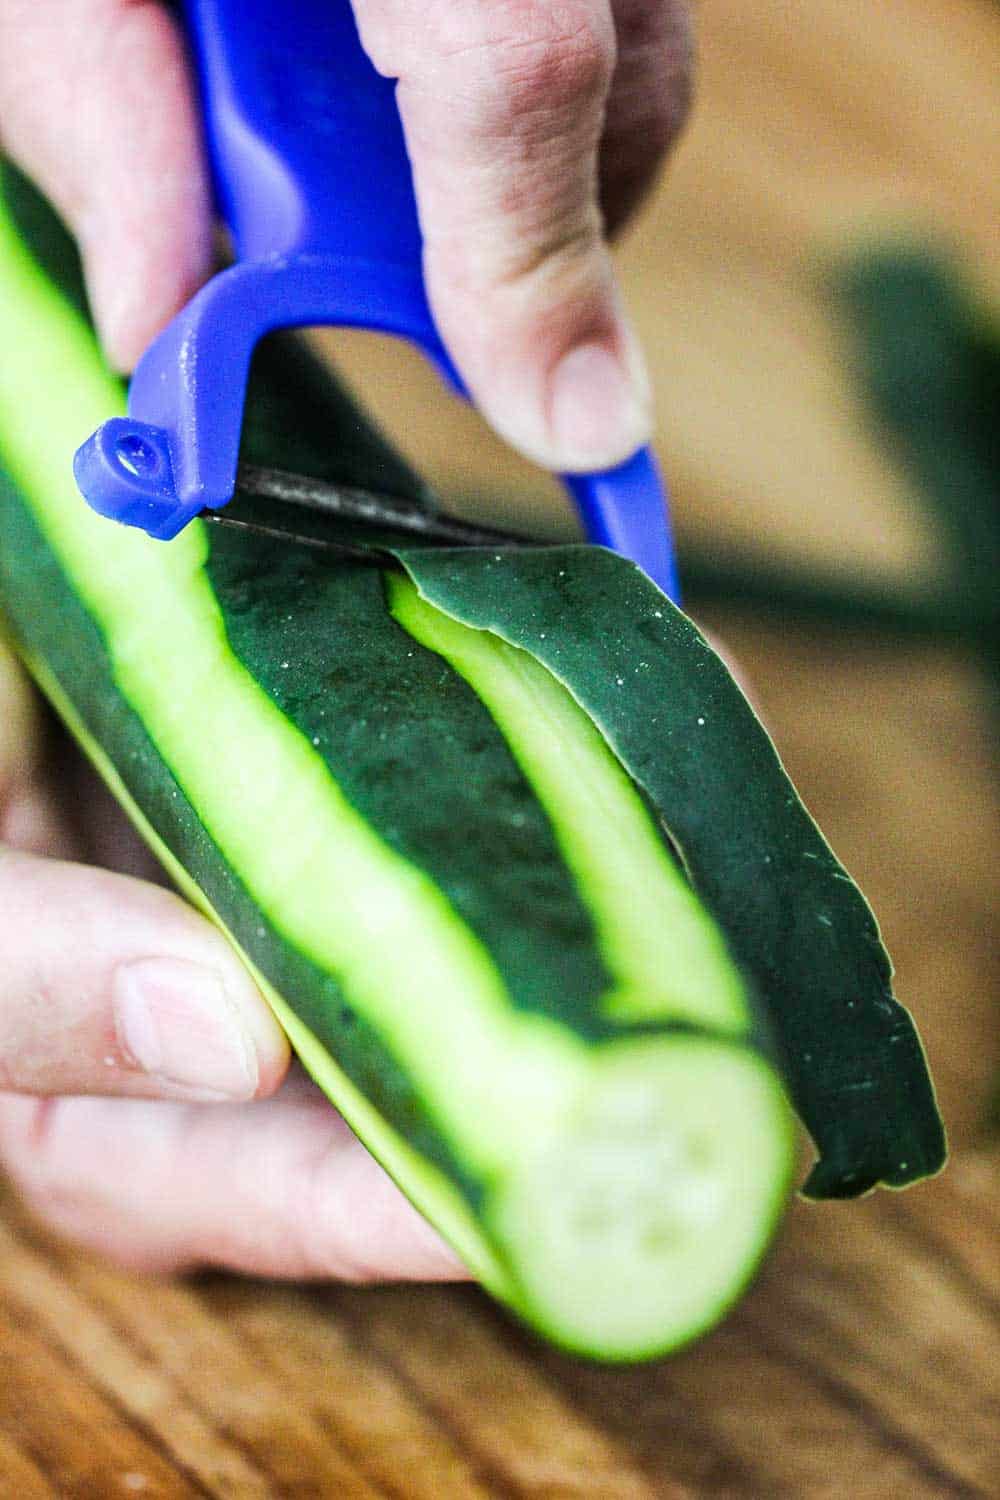 Peel the cucumber, leaving some of the skin on for a striped appearance. 